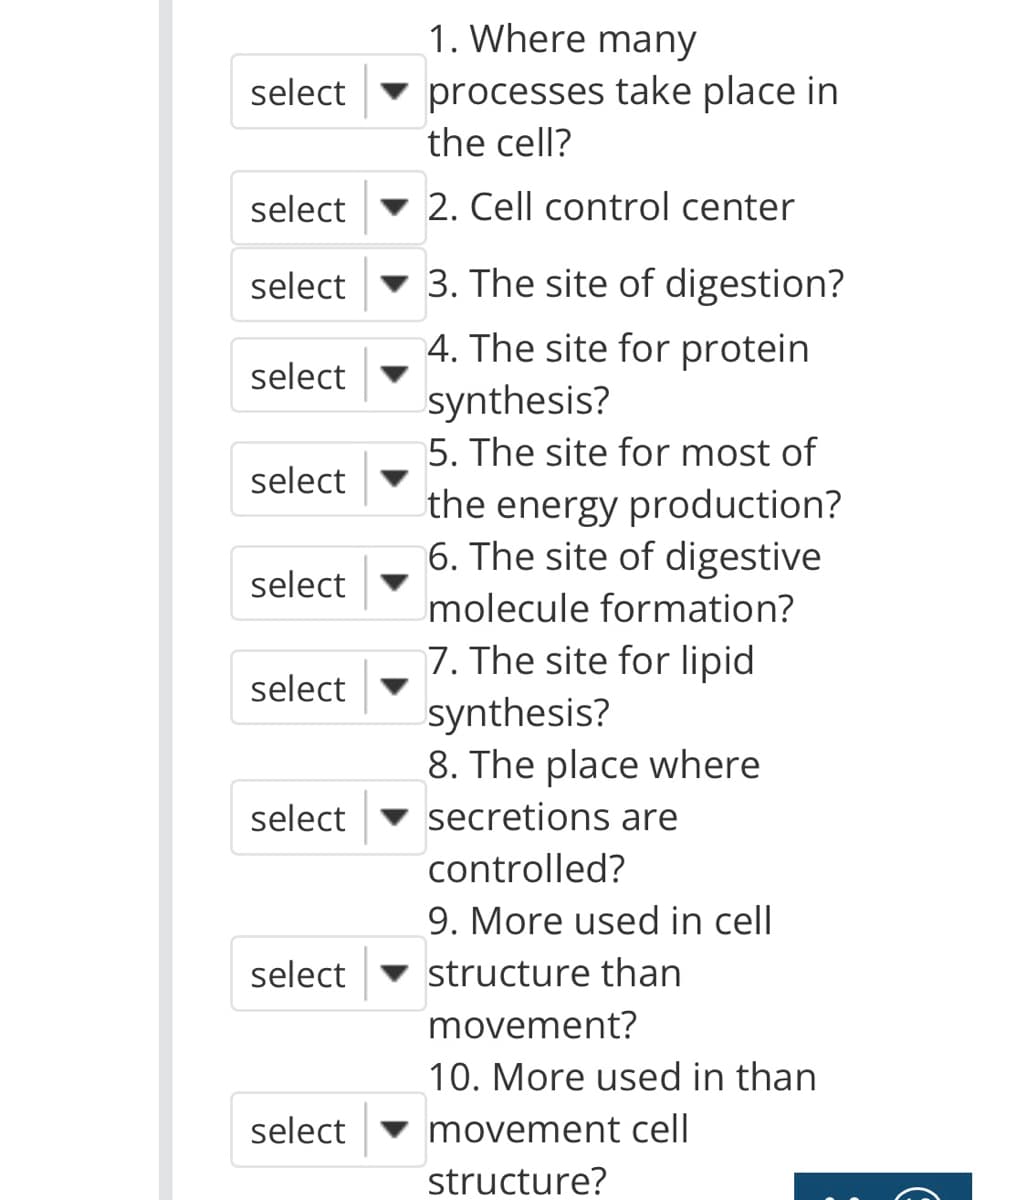 select
select
select
select
select
select
select
select
select
select
1. Where many
processes take place in
the cell?
2. Cell control center
3. The site of digestion?
4. The site for protein
synthesis?
5. The site for most of
the energy production?
6. The site of digestive
molecule formation?
7. The site for lipid
synthesis?
8. The place where
secretions are
controlled?
9. More used in cell
structure than
movement?
10. More used in than
movement cell
structure?